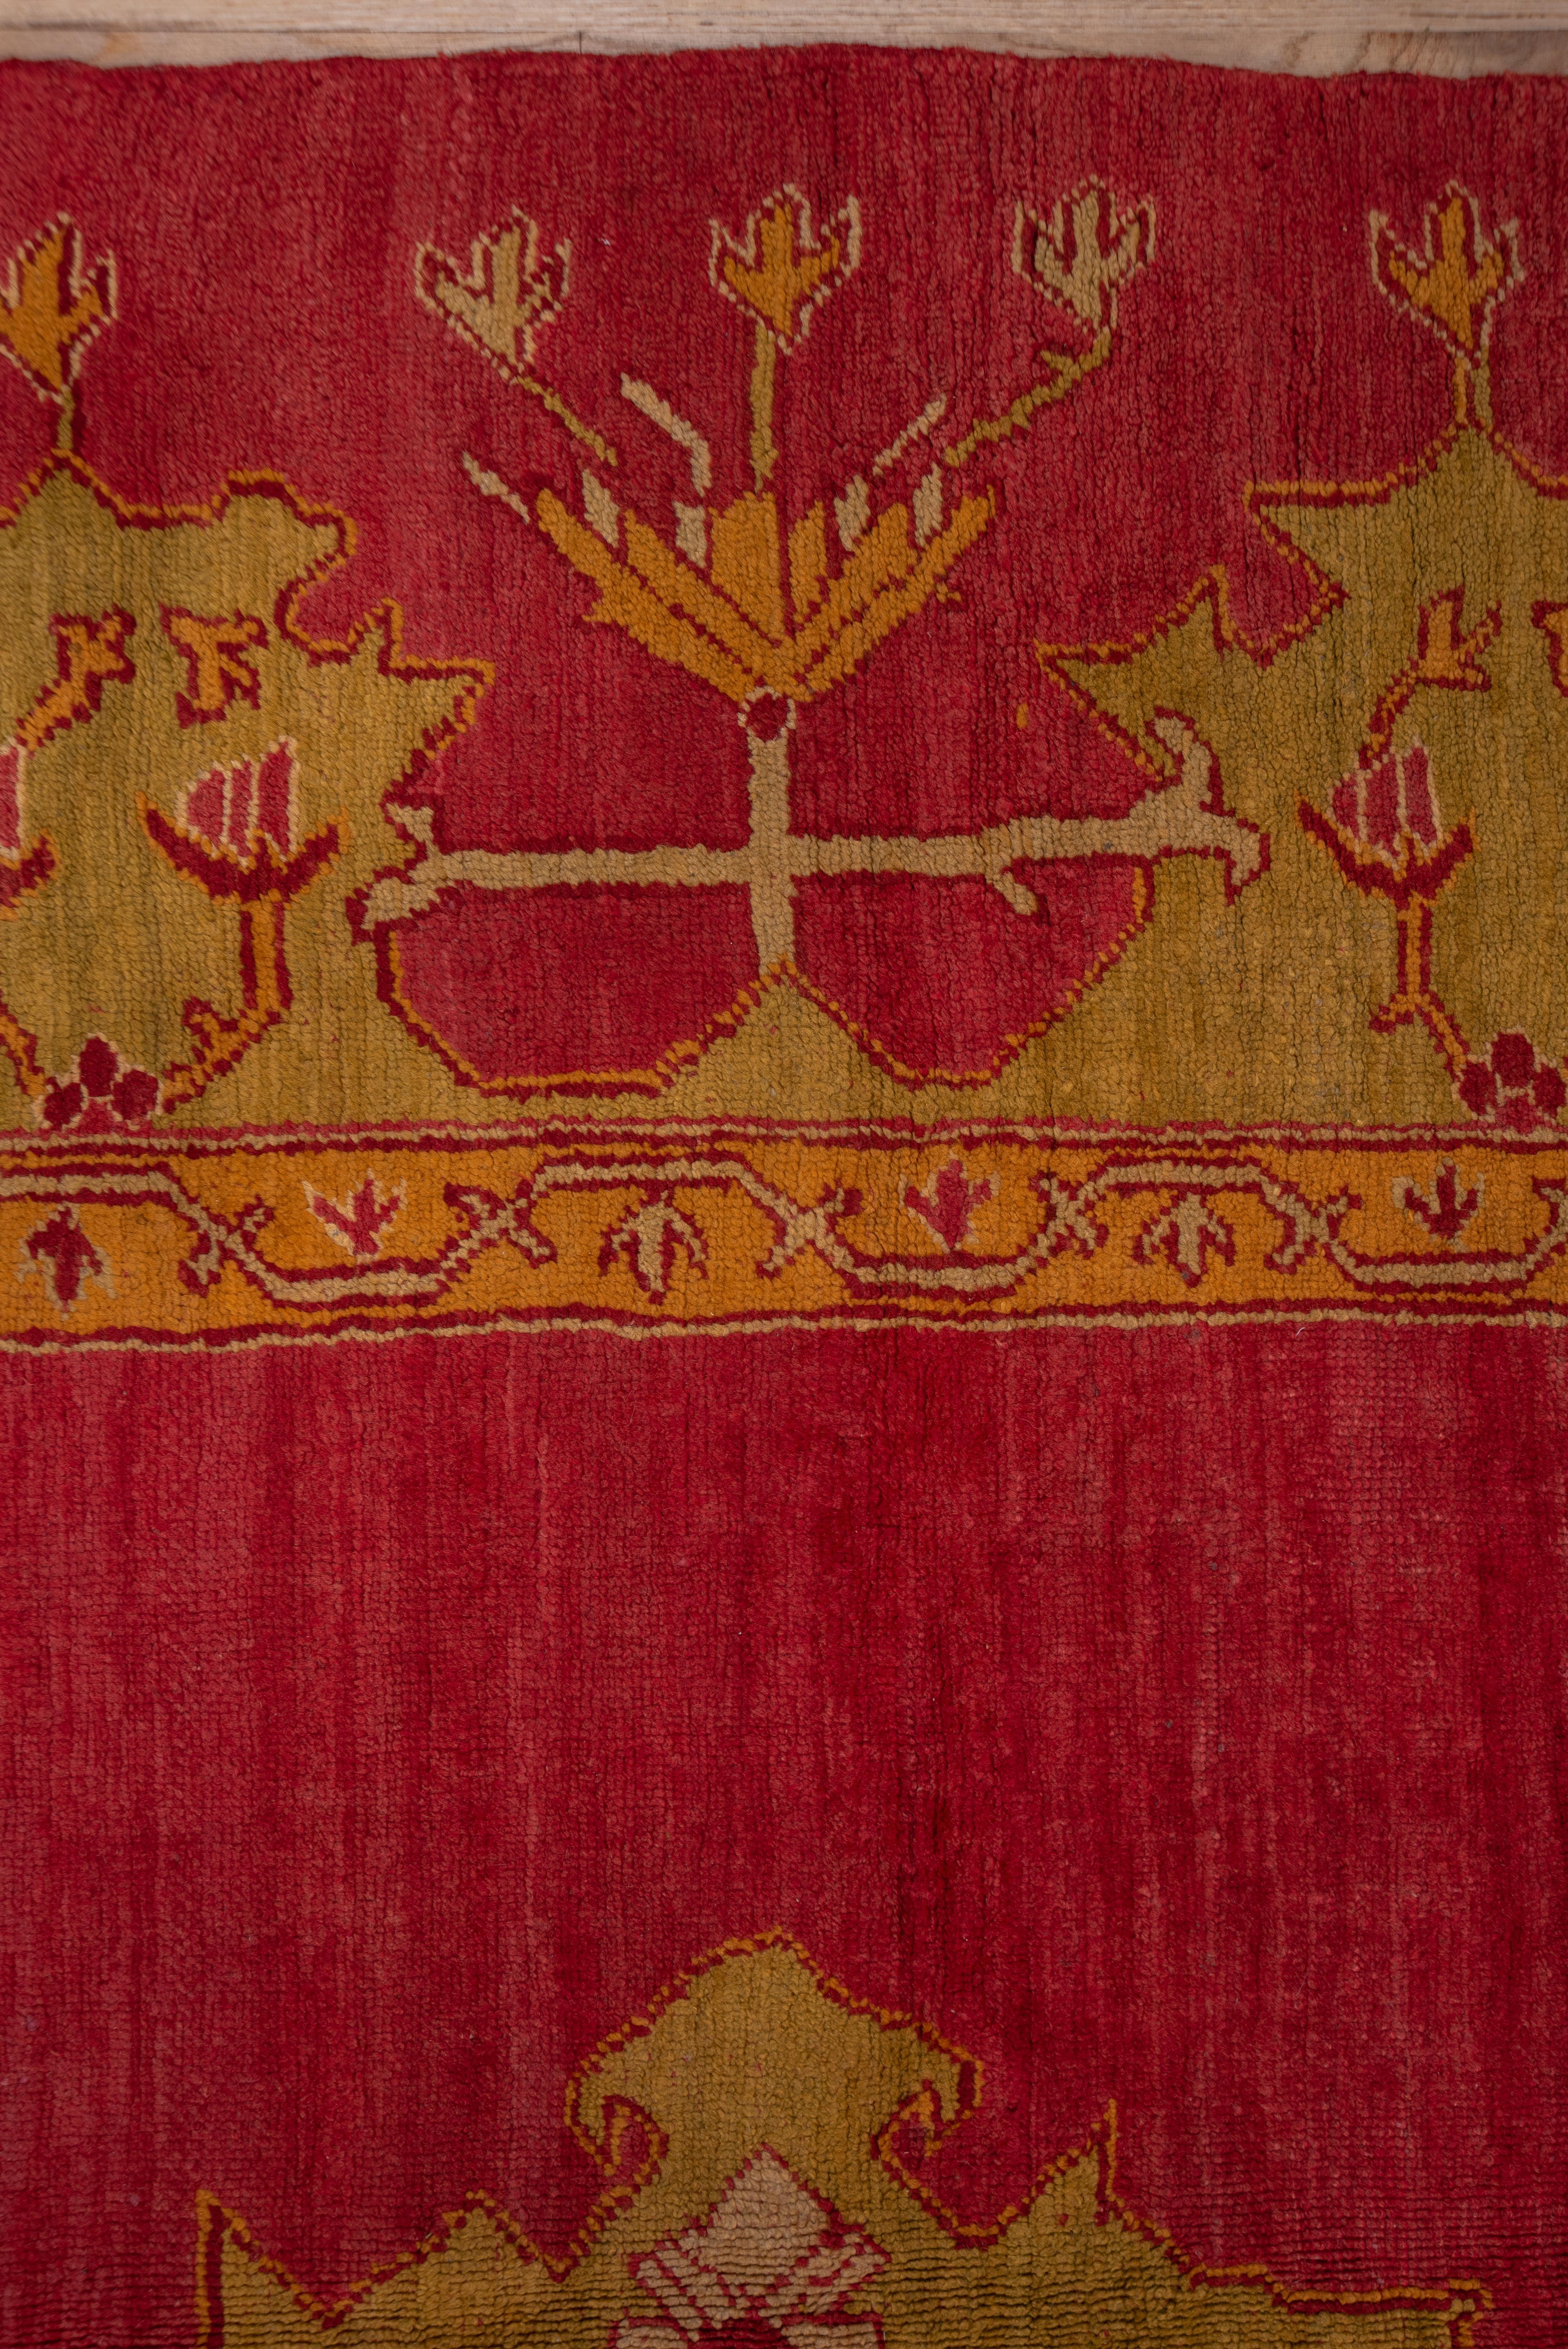 This is an outstanding Oushak in excellent pile, with a brisk Turkey red open field showcasing a jagged lime and gold pendanted medallion with tonally matching double corners. The very wide border has an elaborate reciprocal crenelation pattern in